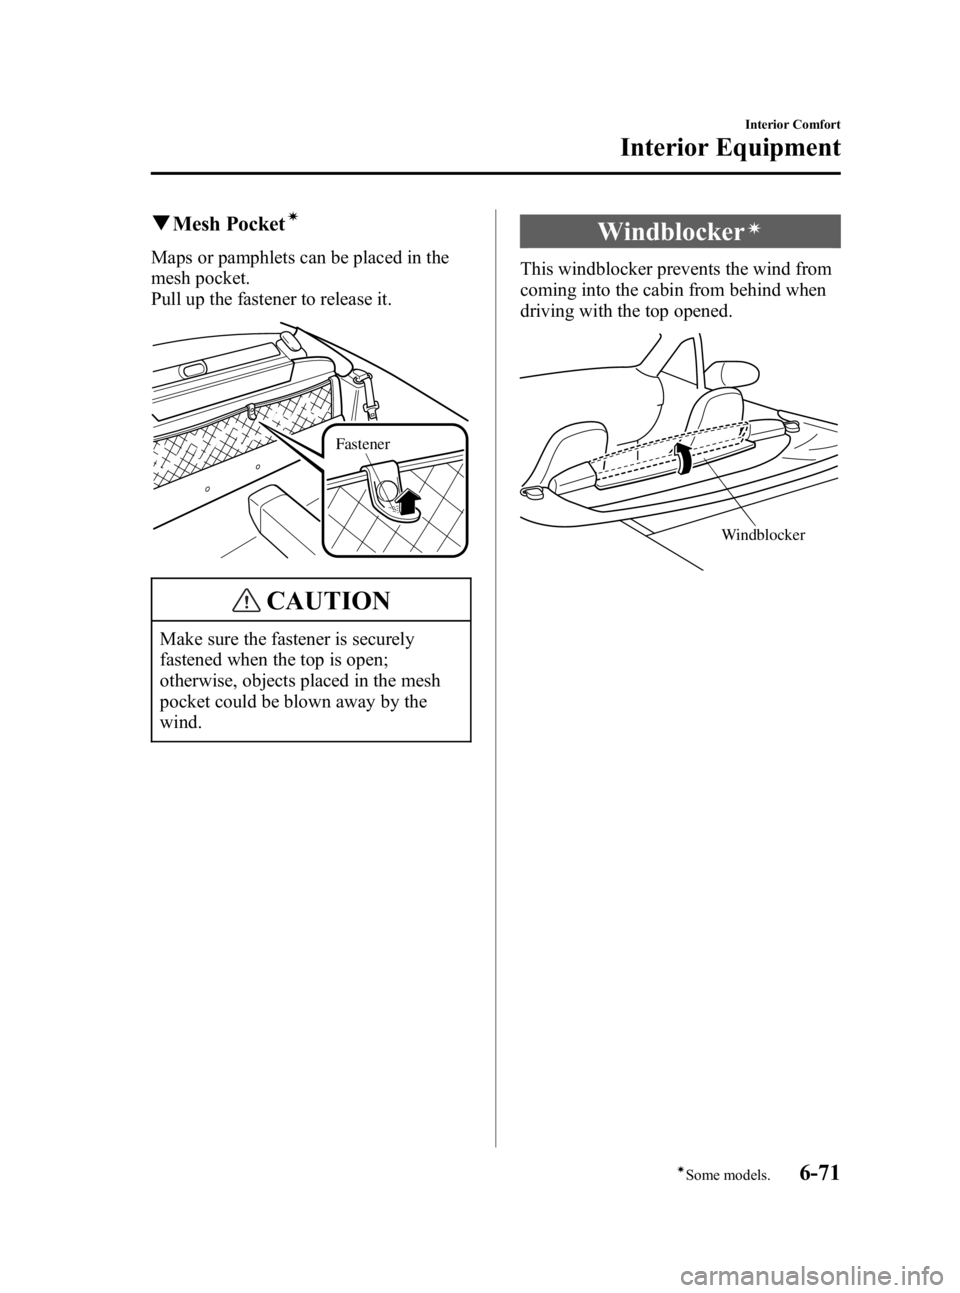 MAZDA MODEL MX-5 MIATA 2005  Owners Manual Black plate (197,1)
qMesh Pocketí
Maps or pamphlets can be placed in the
mesh pocket.
Pull up the fastener to release it.
Fastener
CAUTION
Make sure the fastener is securely
fastened when the top is 